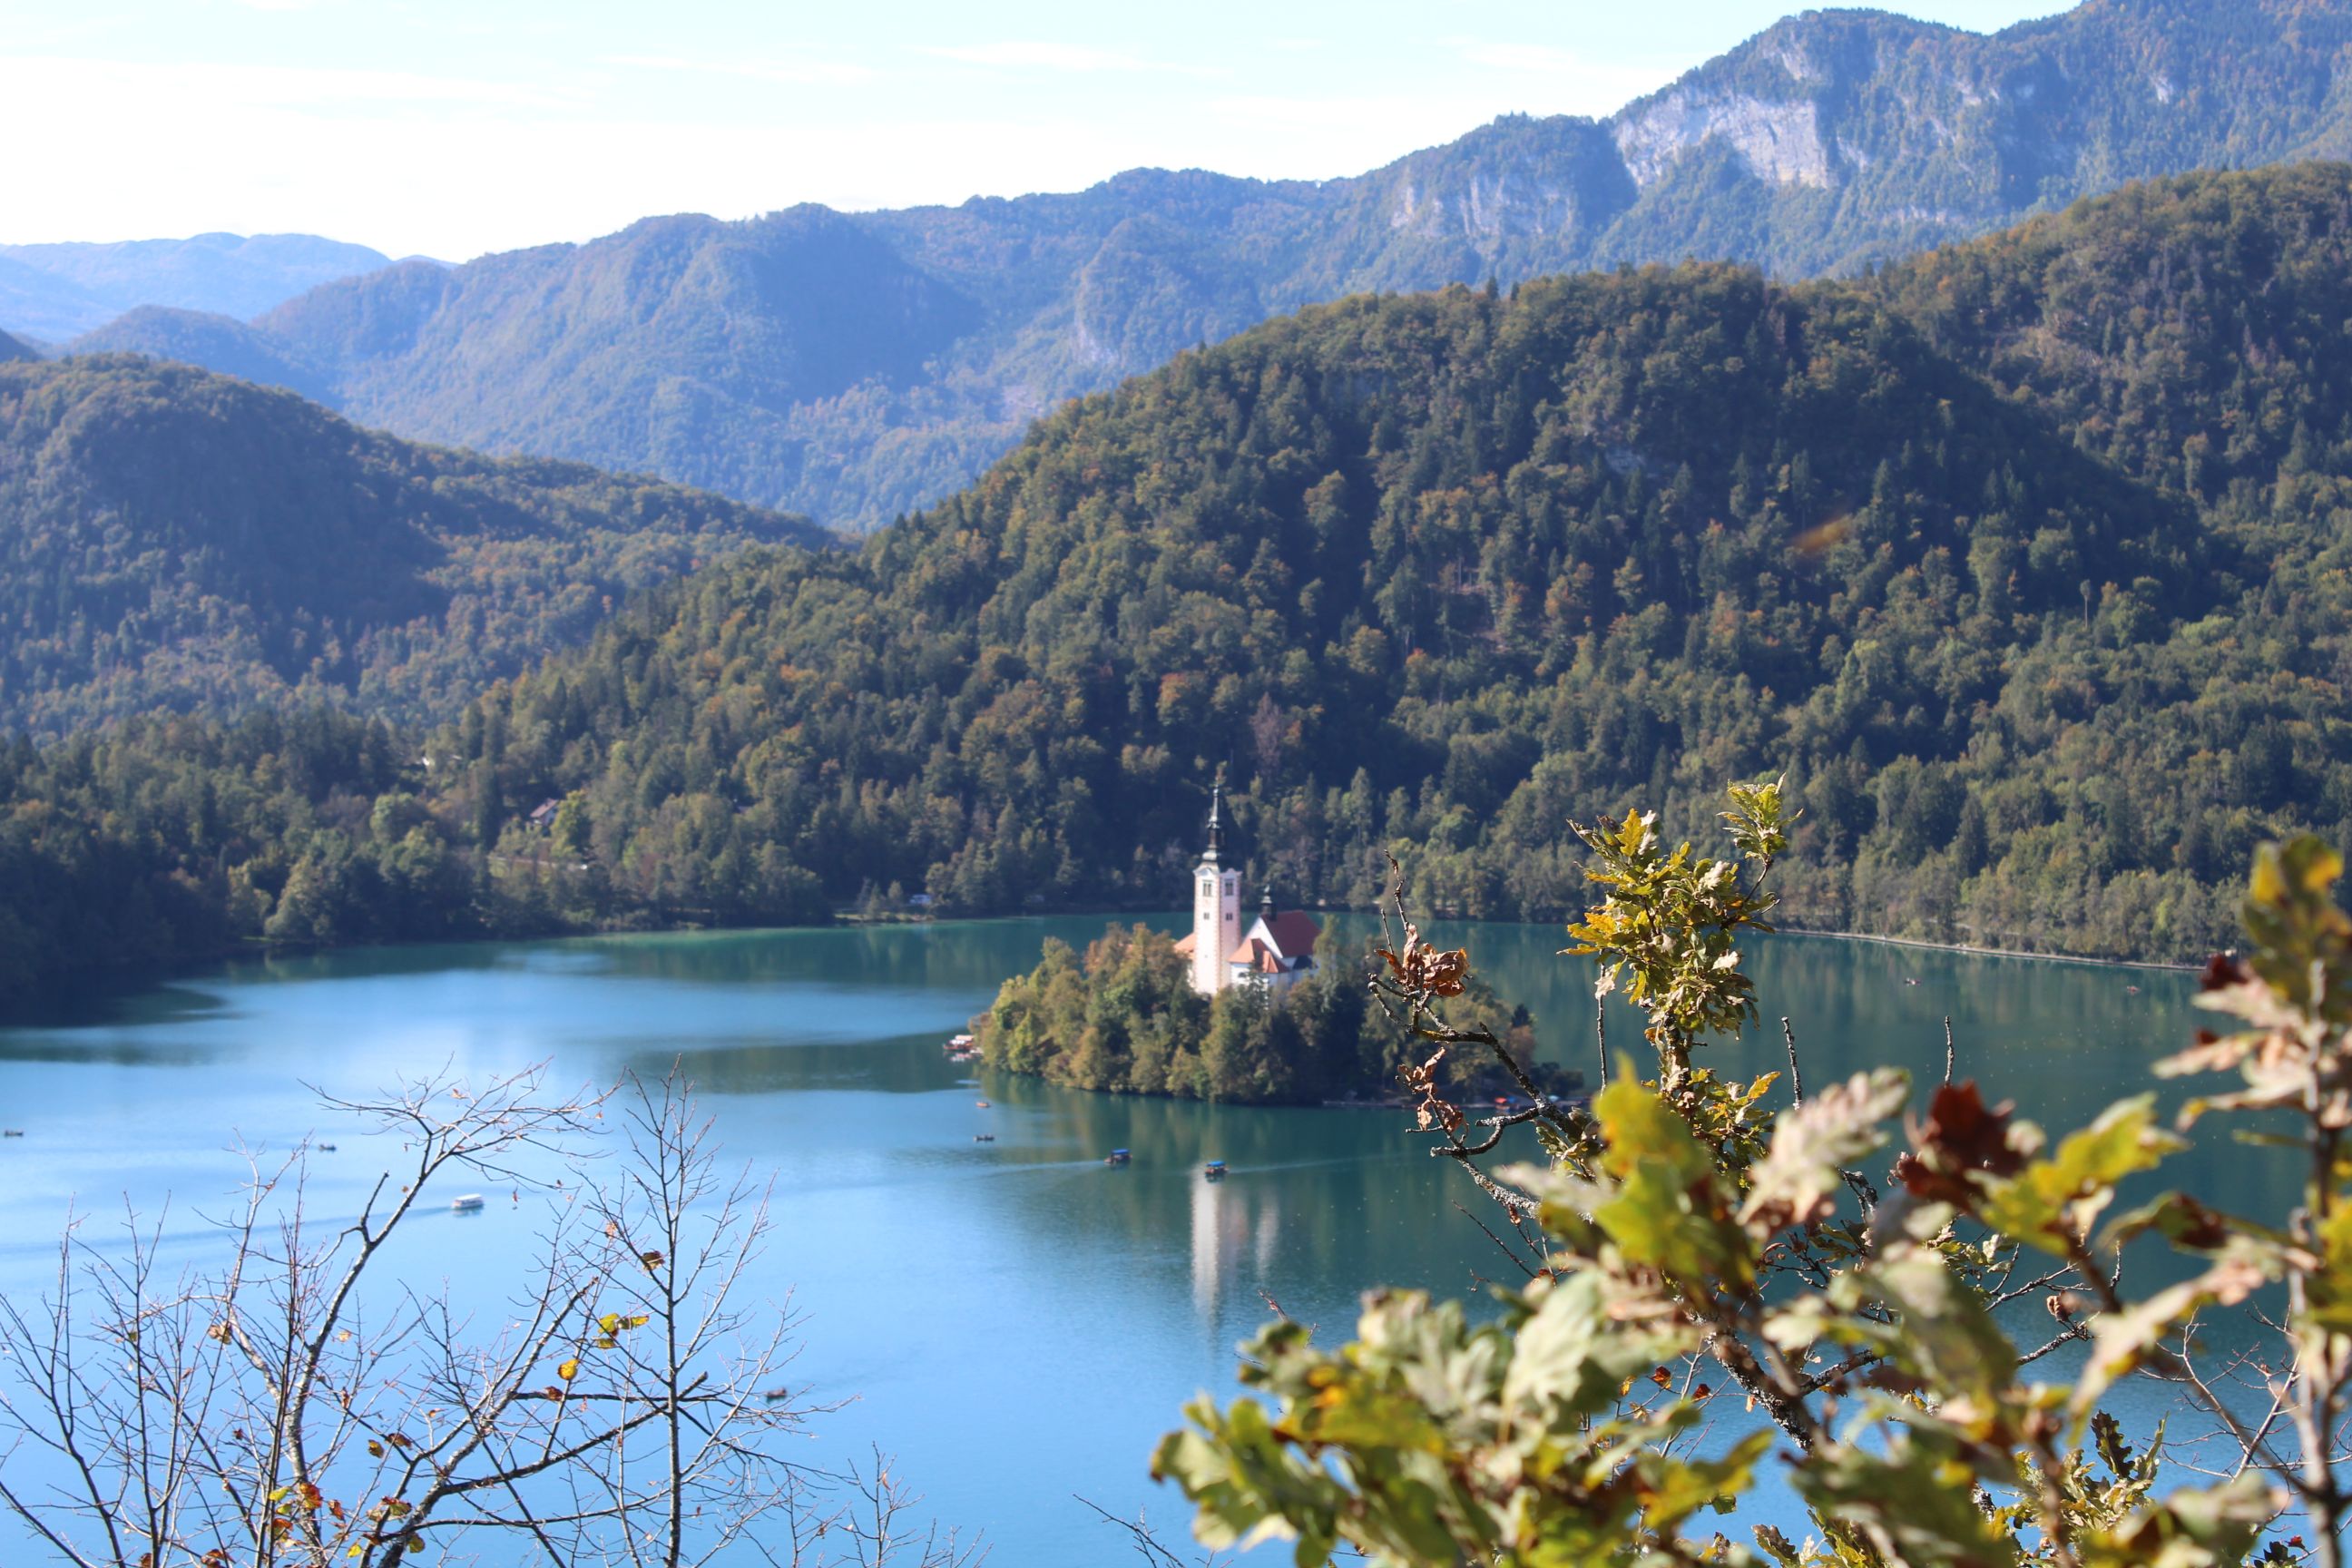 Picturesque Lake Bled, with the Church of Mary the Queen on a small islet in the middle of the lake.